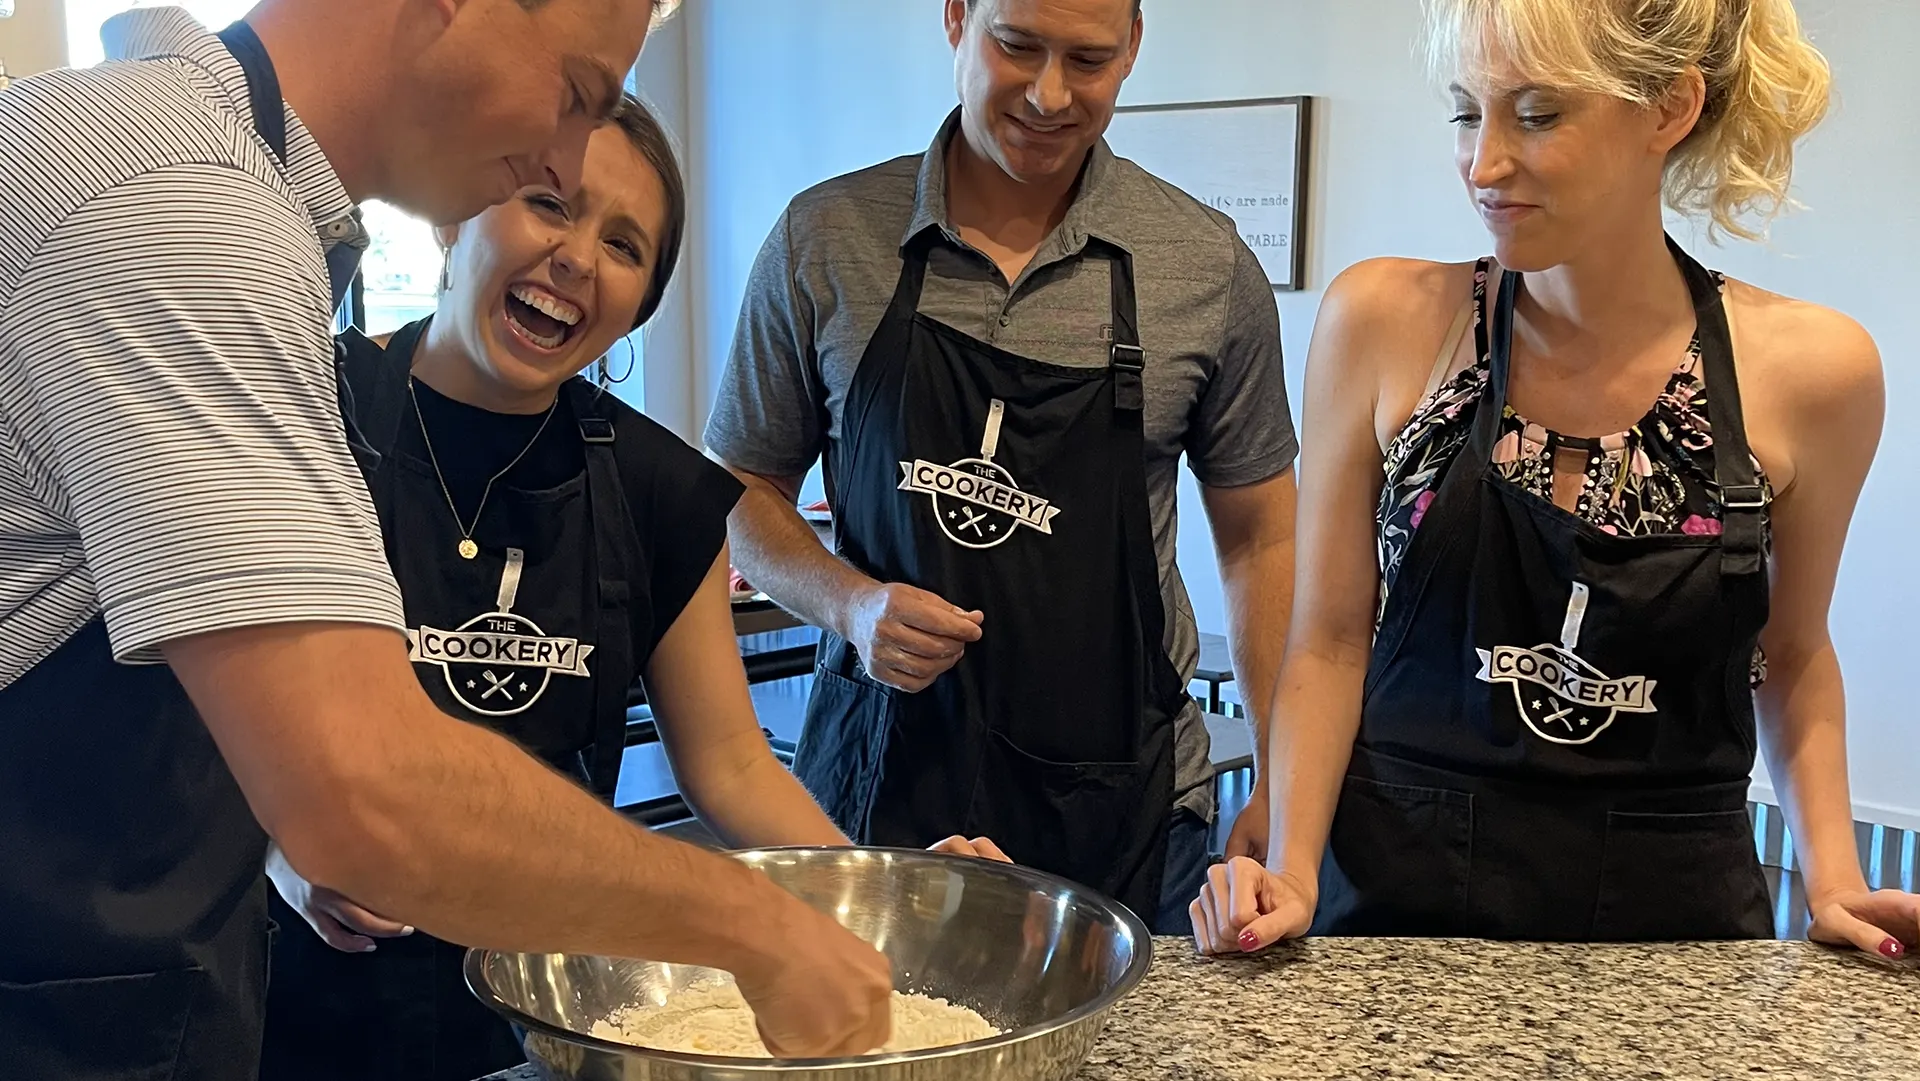 The Cookery Dallas Cooking Classes